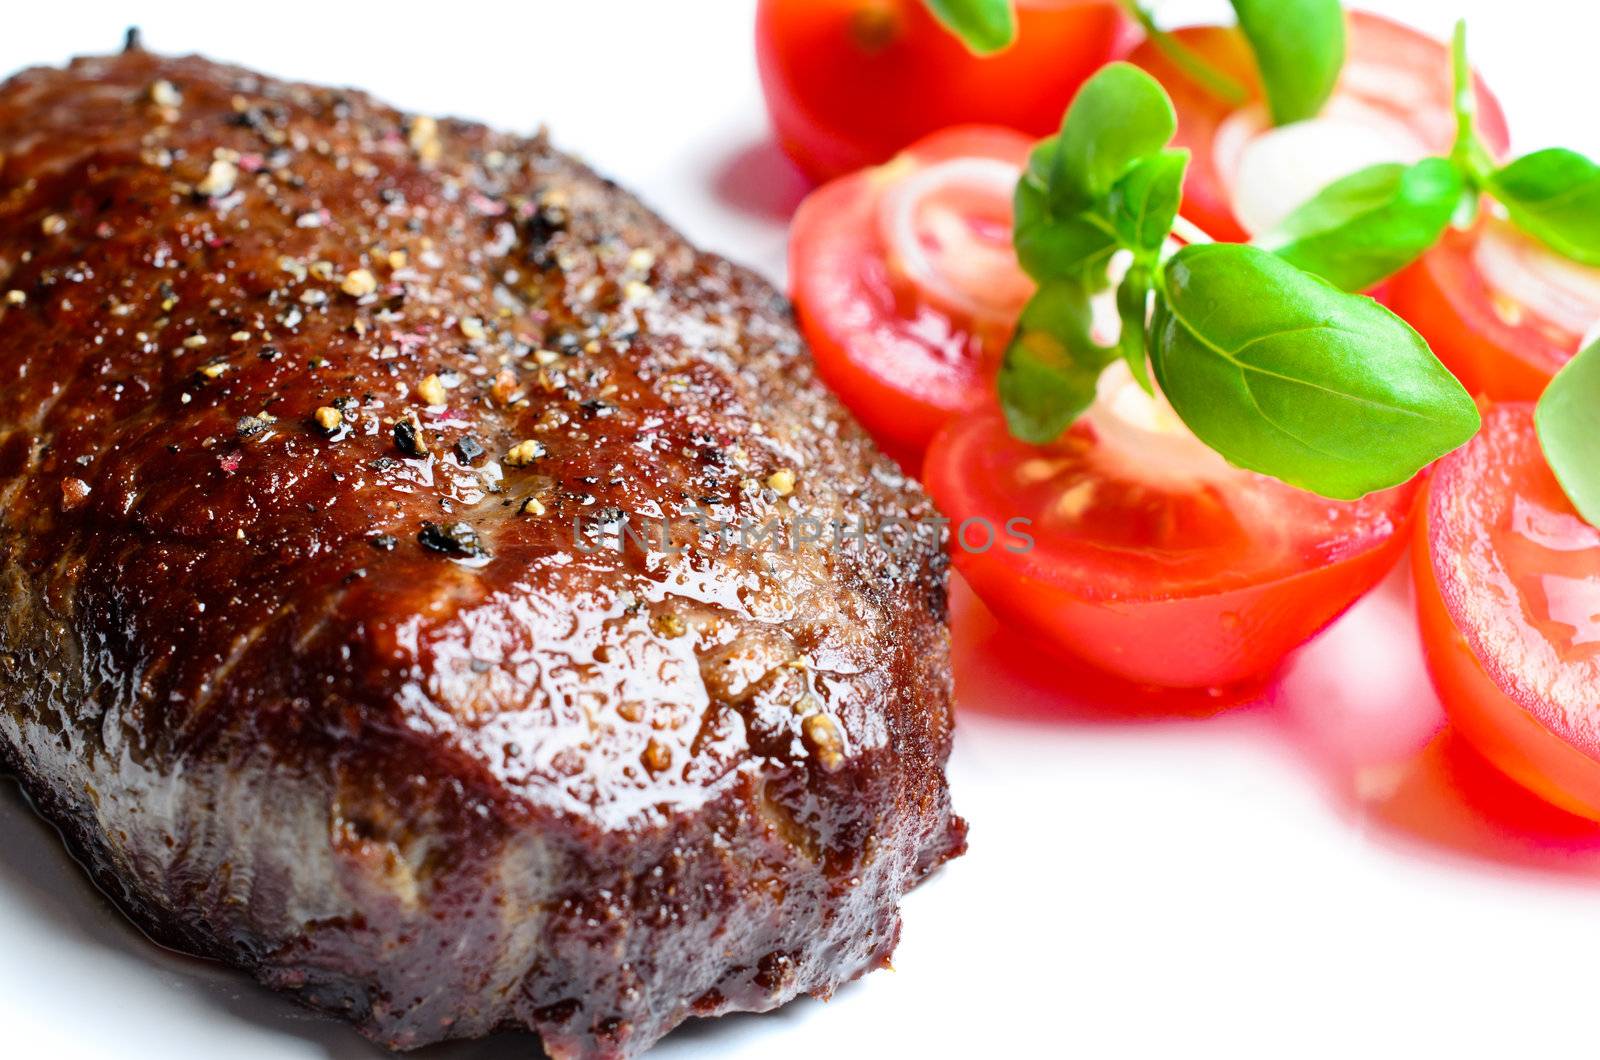 Steak with tomatoes close up